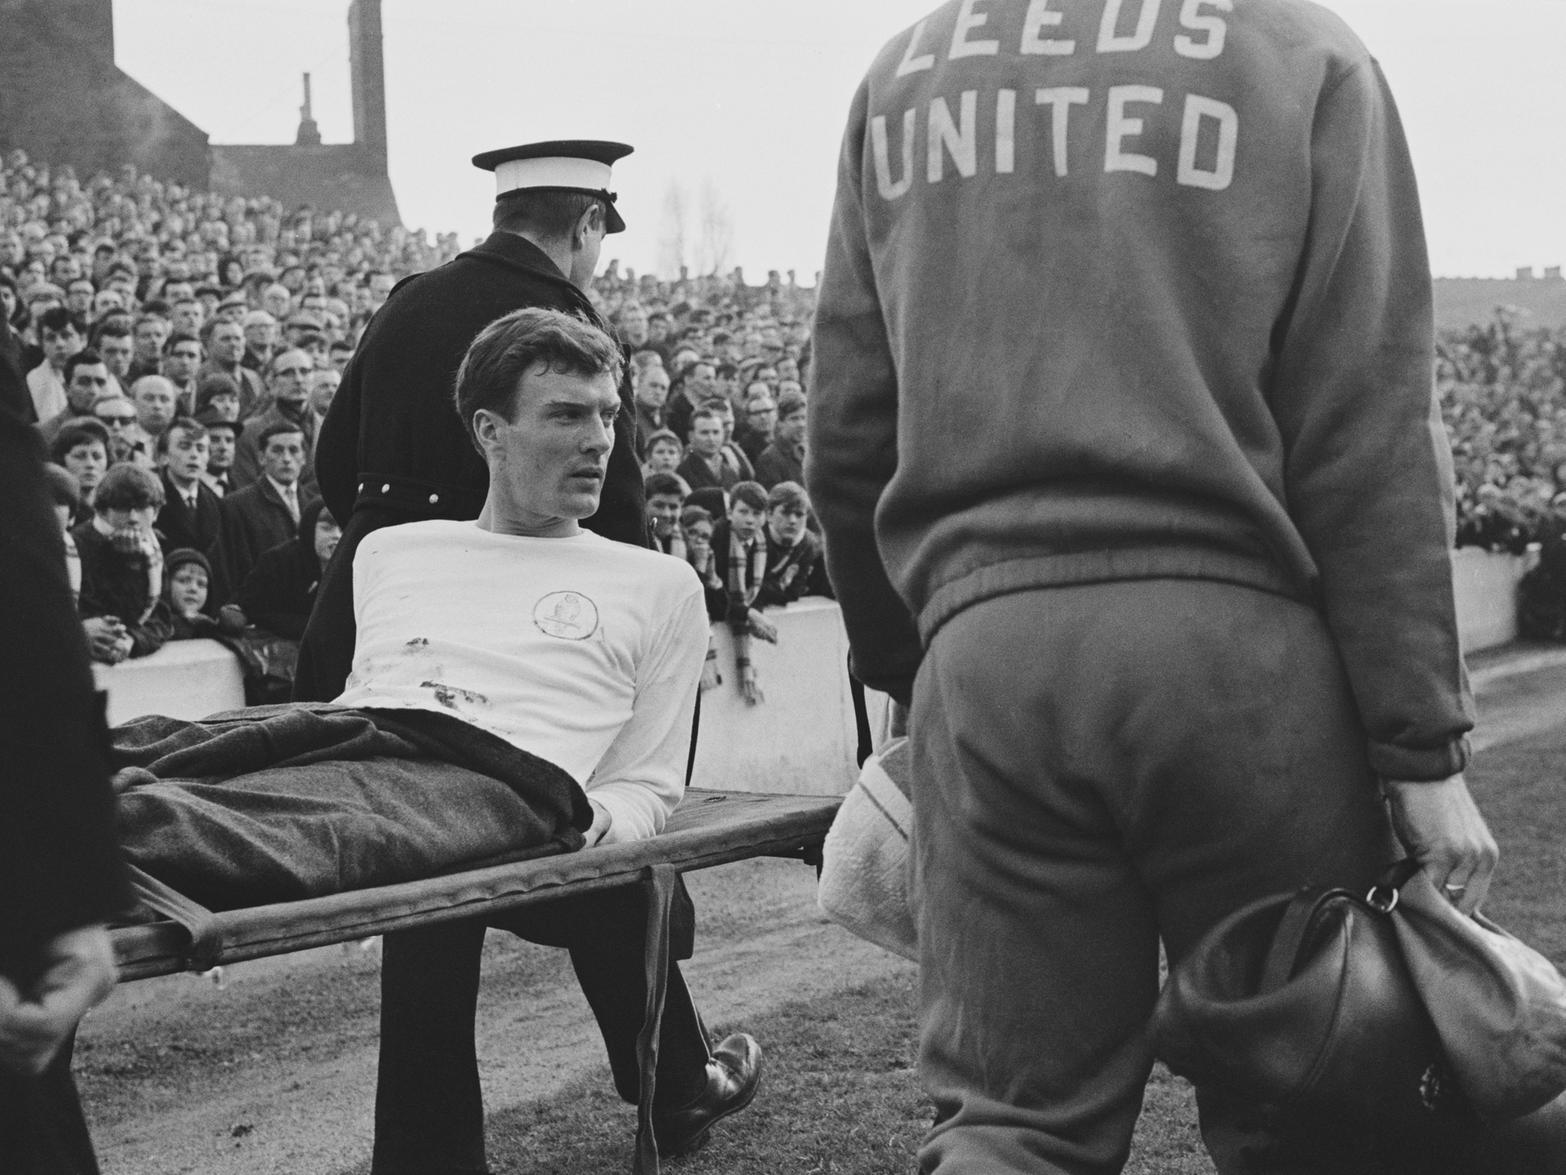 Footballer Paul Madeley of Leeds United is carried off after an injury during a League Division One match against Nottingham Forest